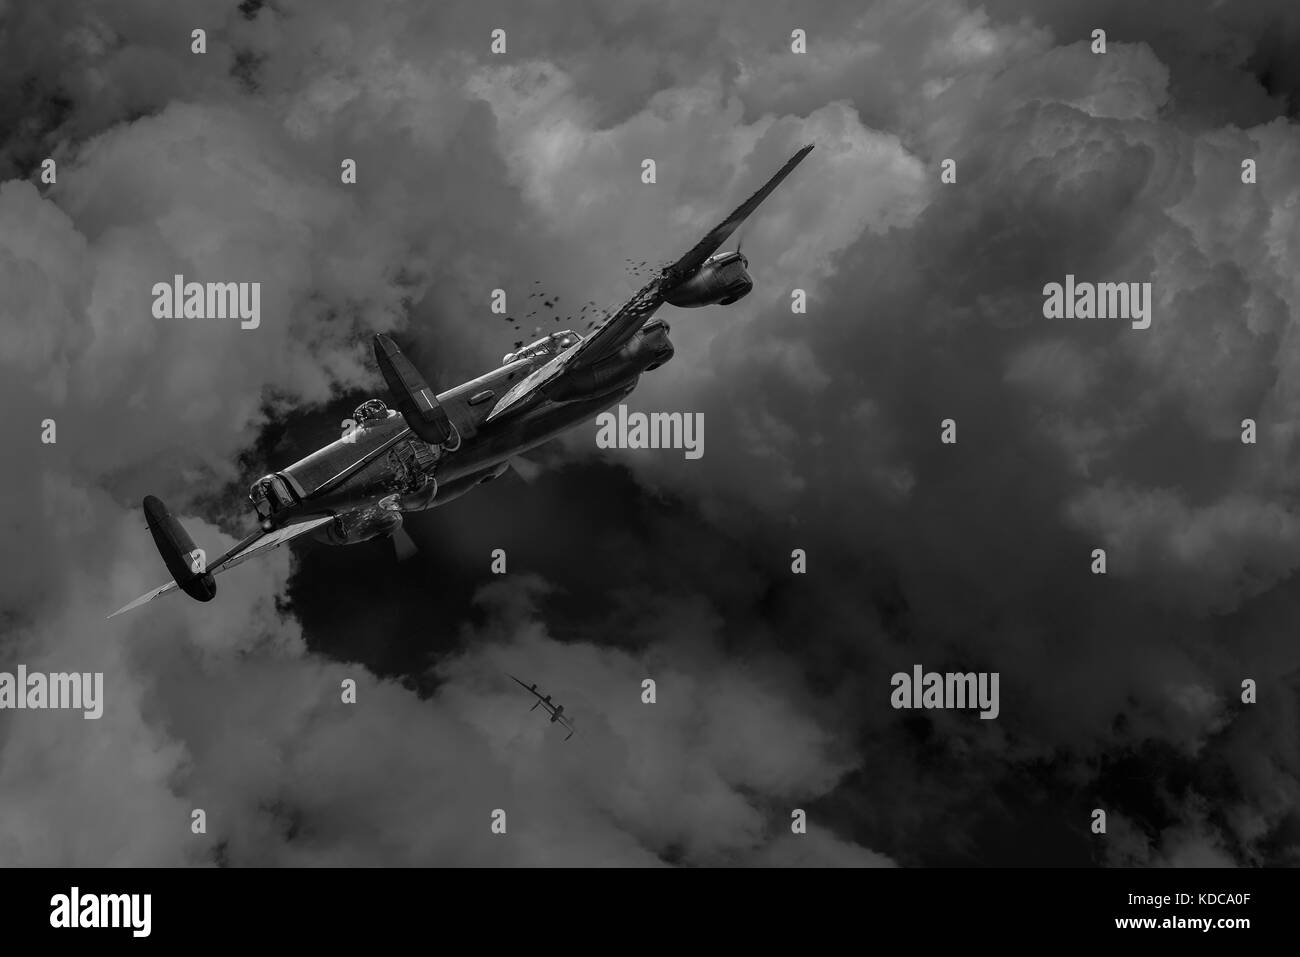 460 Squadron RAAF Lancaster ND968, AR-O 'Oboe' lurches violently into a downward spiral after being hit over Alsace by another Lanc, which falls away  Stock Photo